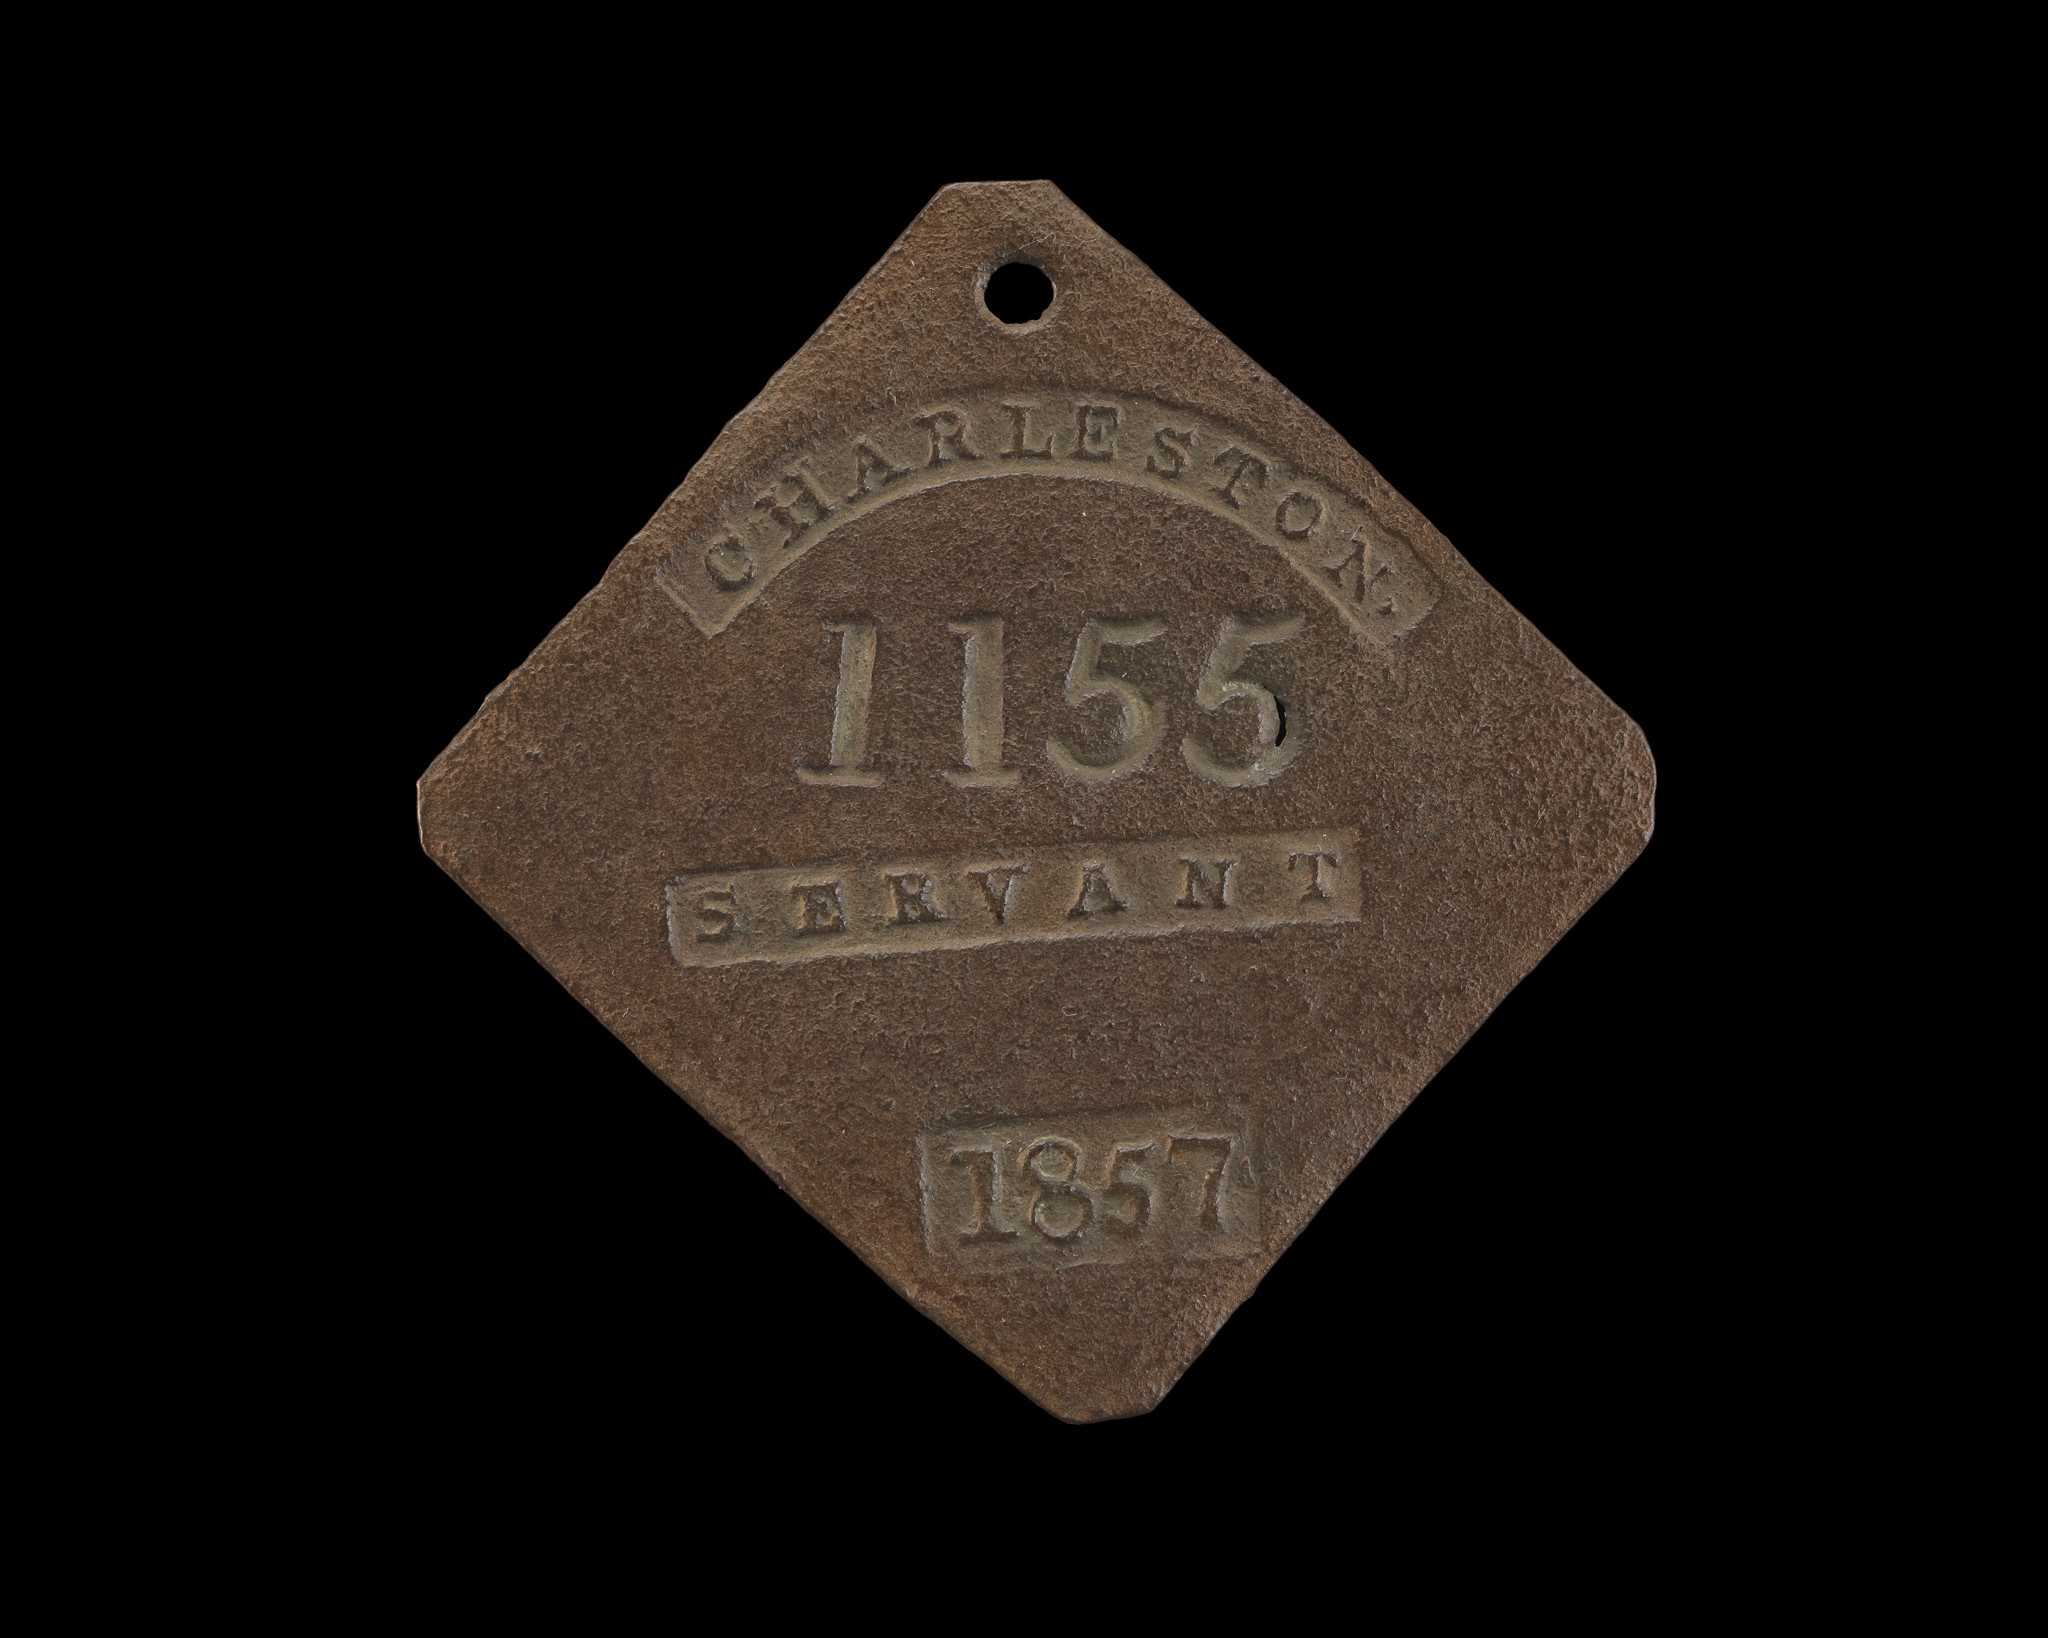 Photograph of square slave badge